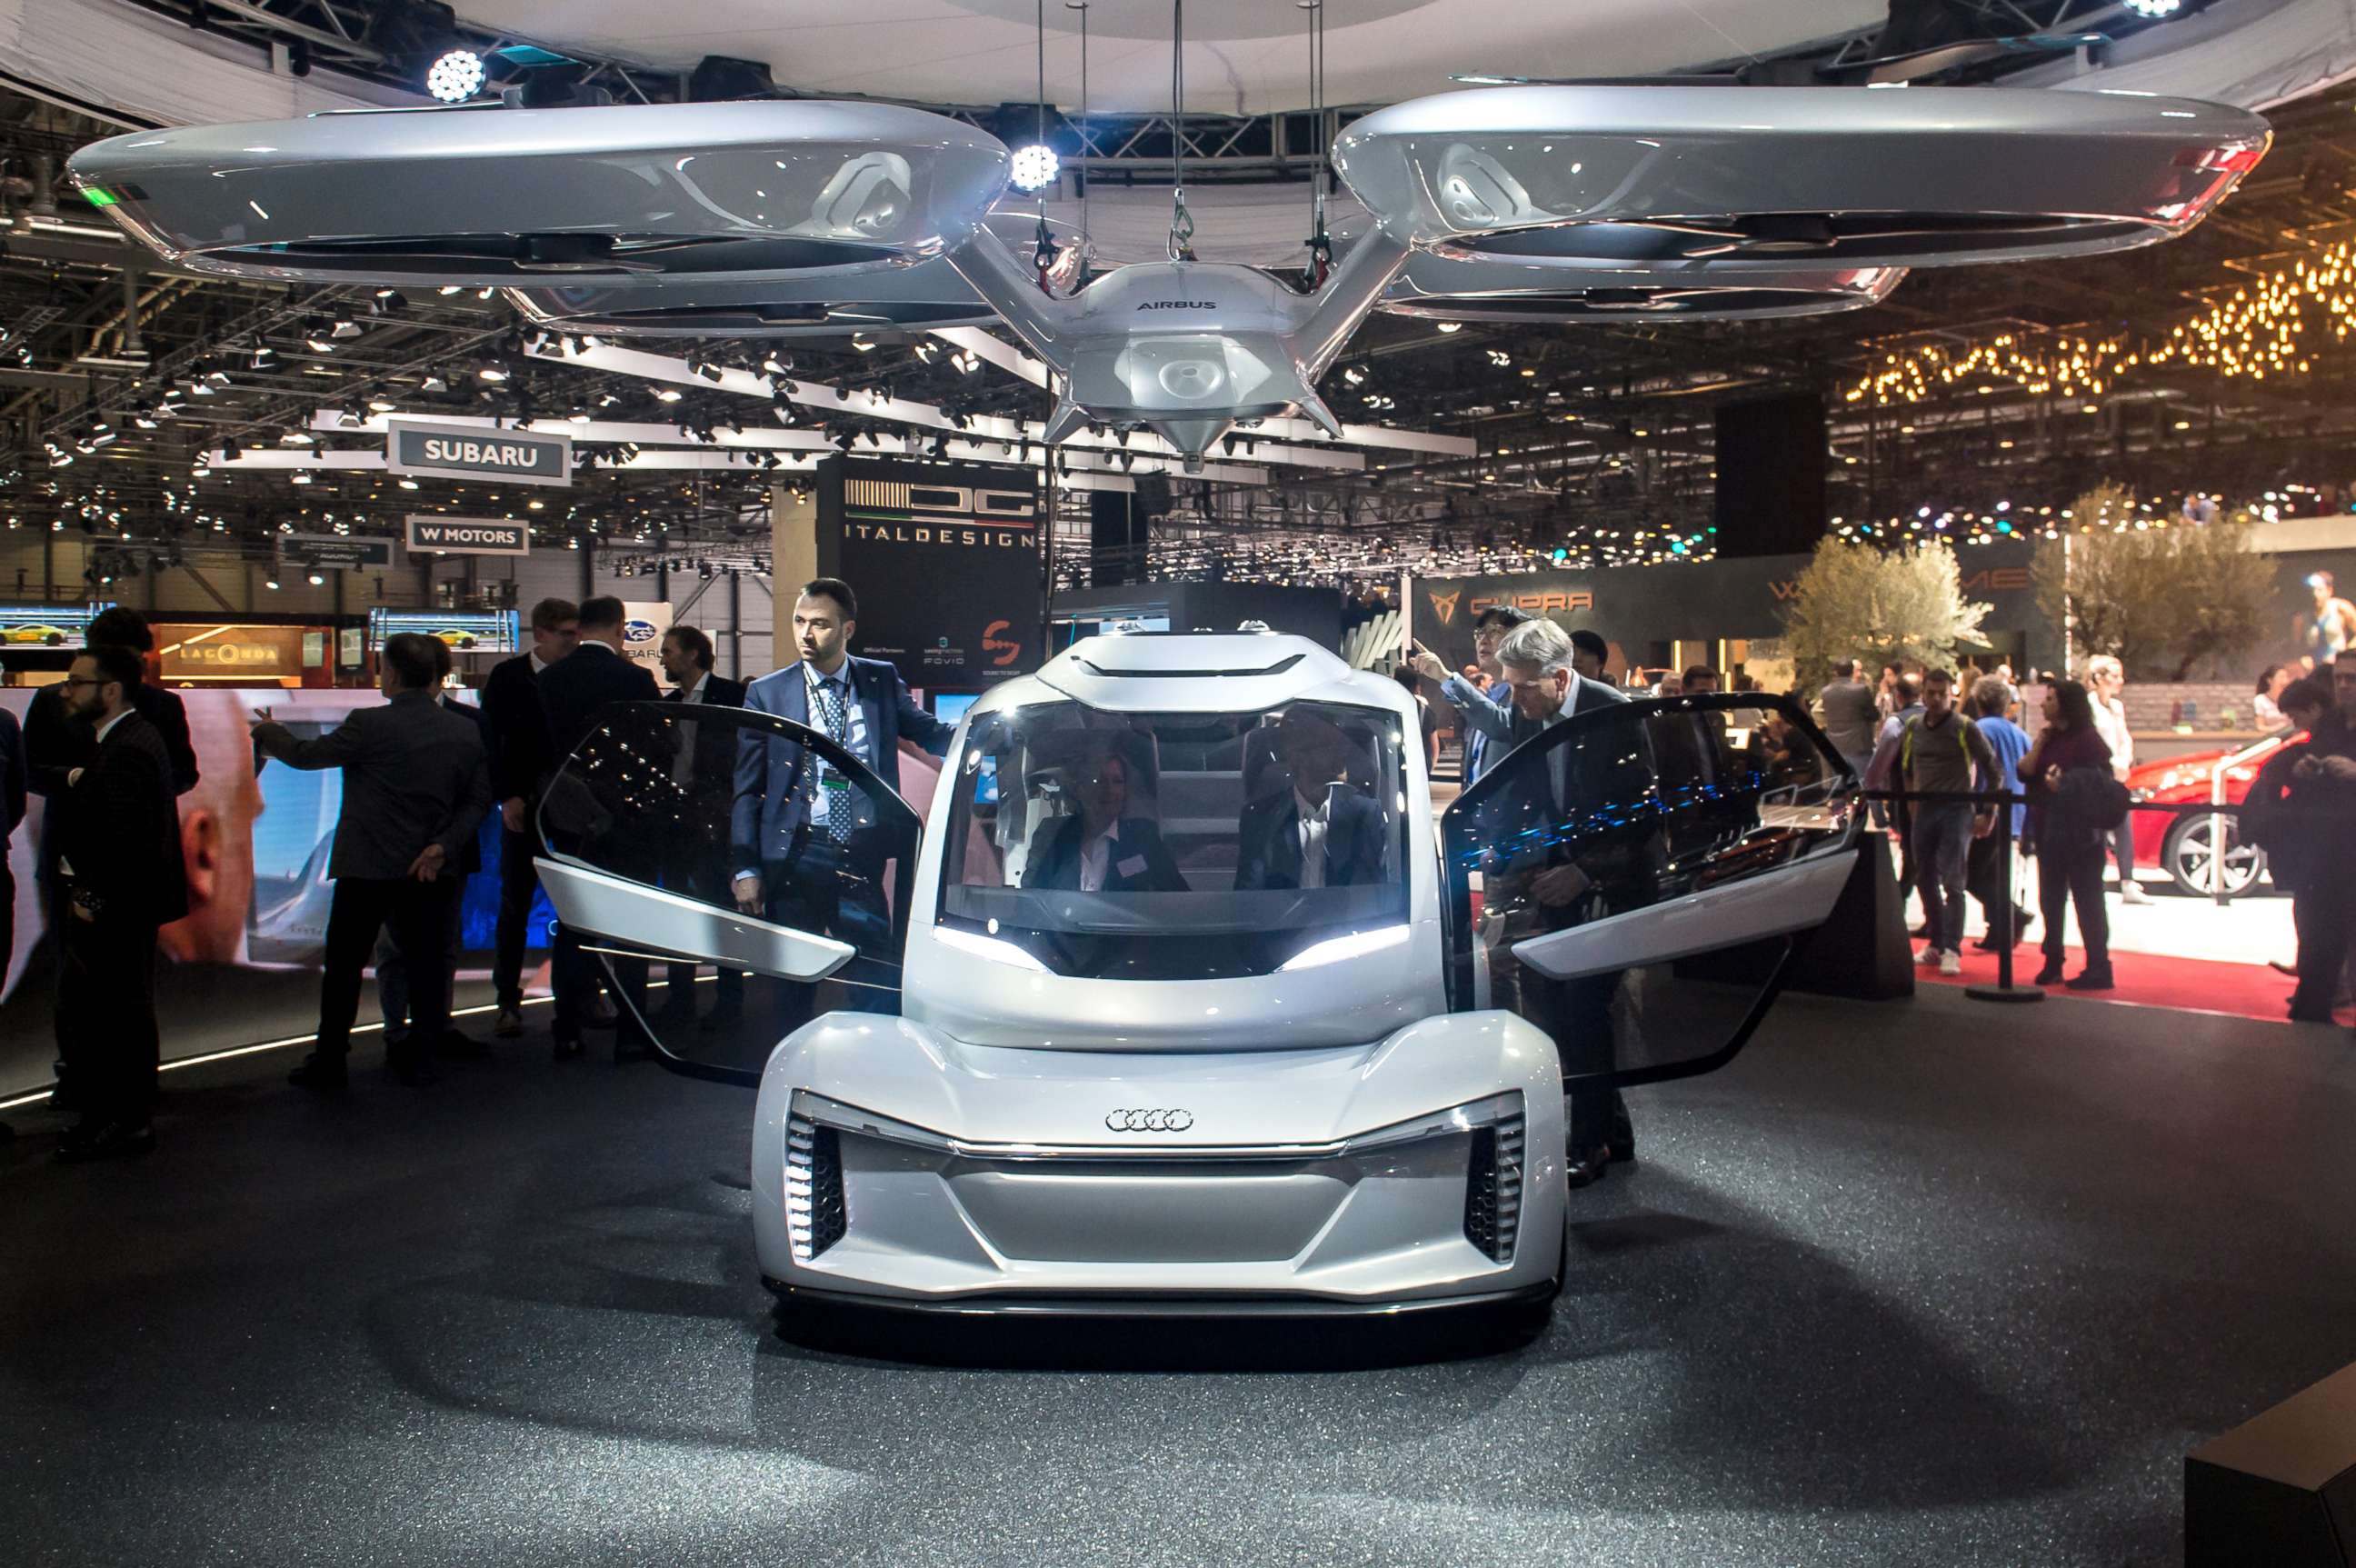 PHOTO: The "Pop.up next" concept flying car, a hybrid vehicle that blends a self-driving car and passenger drone by Audi, italdesign and Airbus is seen at the 88th Geneva International Motor Show, March 6, 2018, in Geneva, Switzerland. 